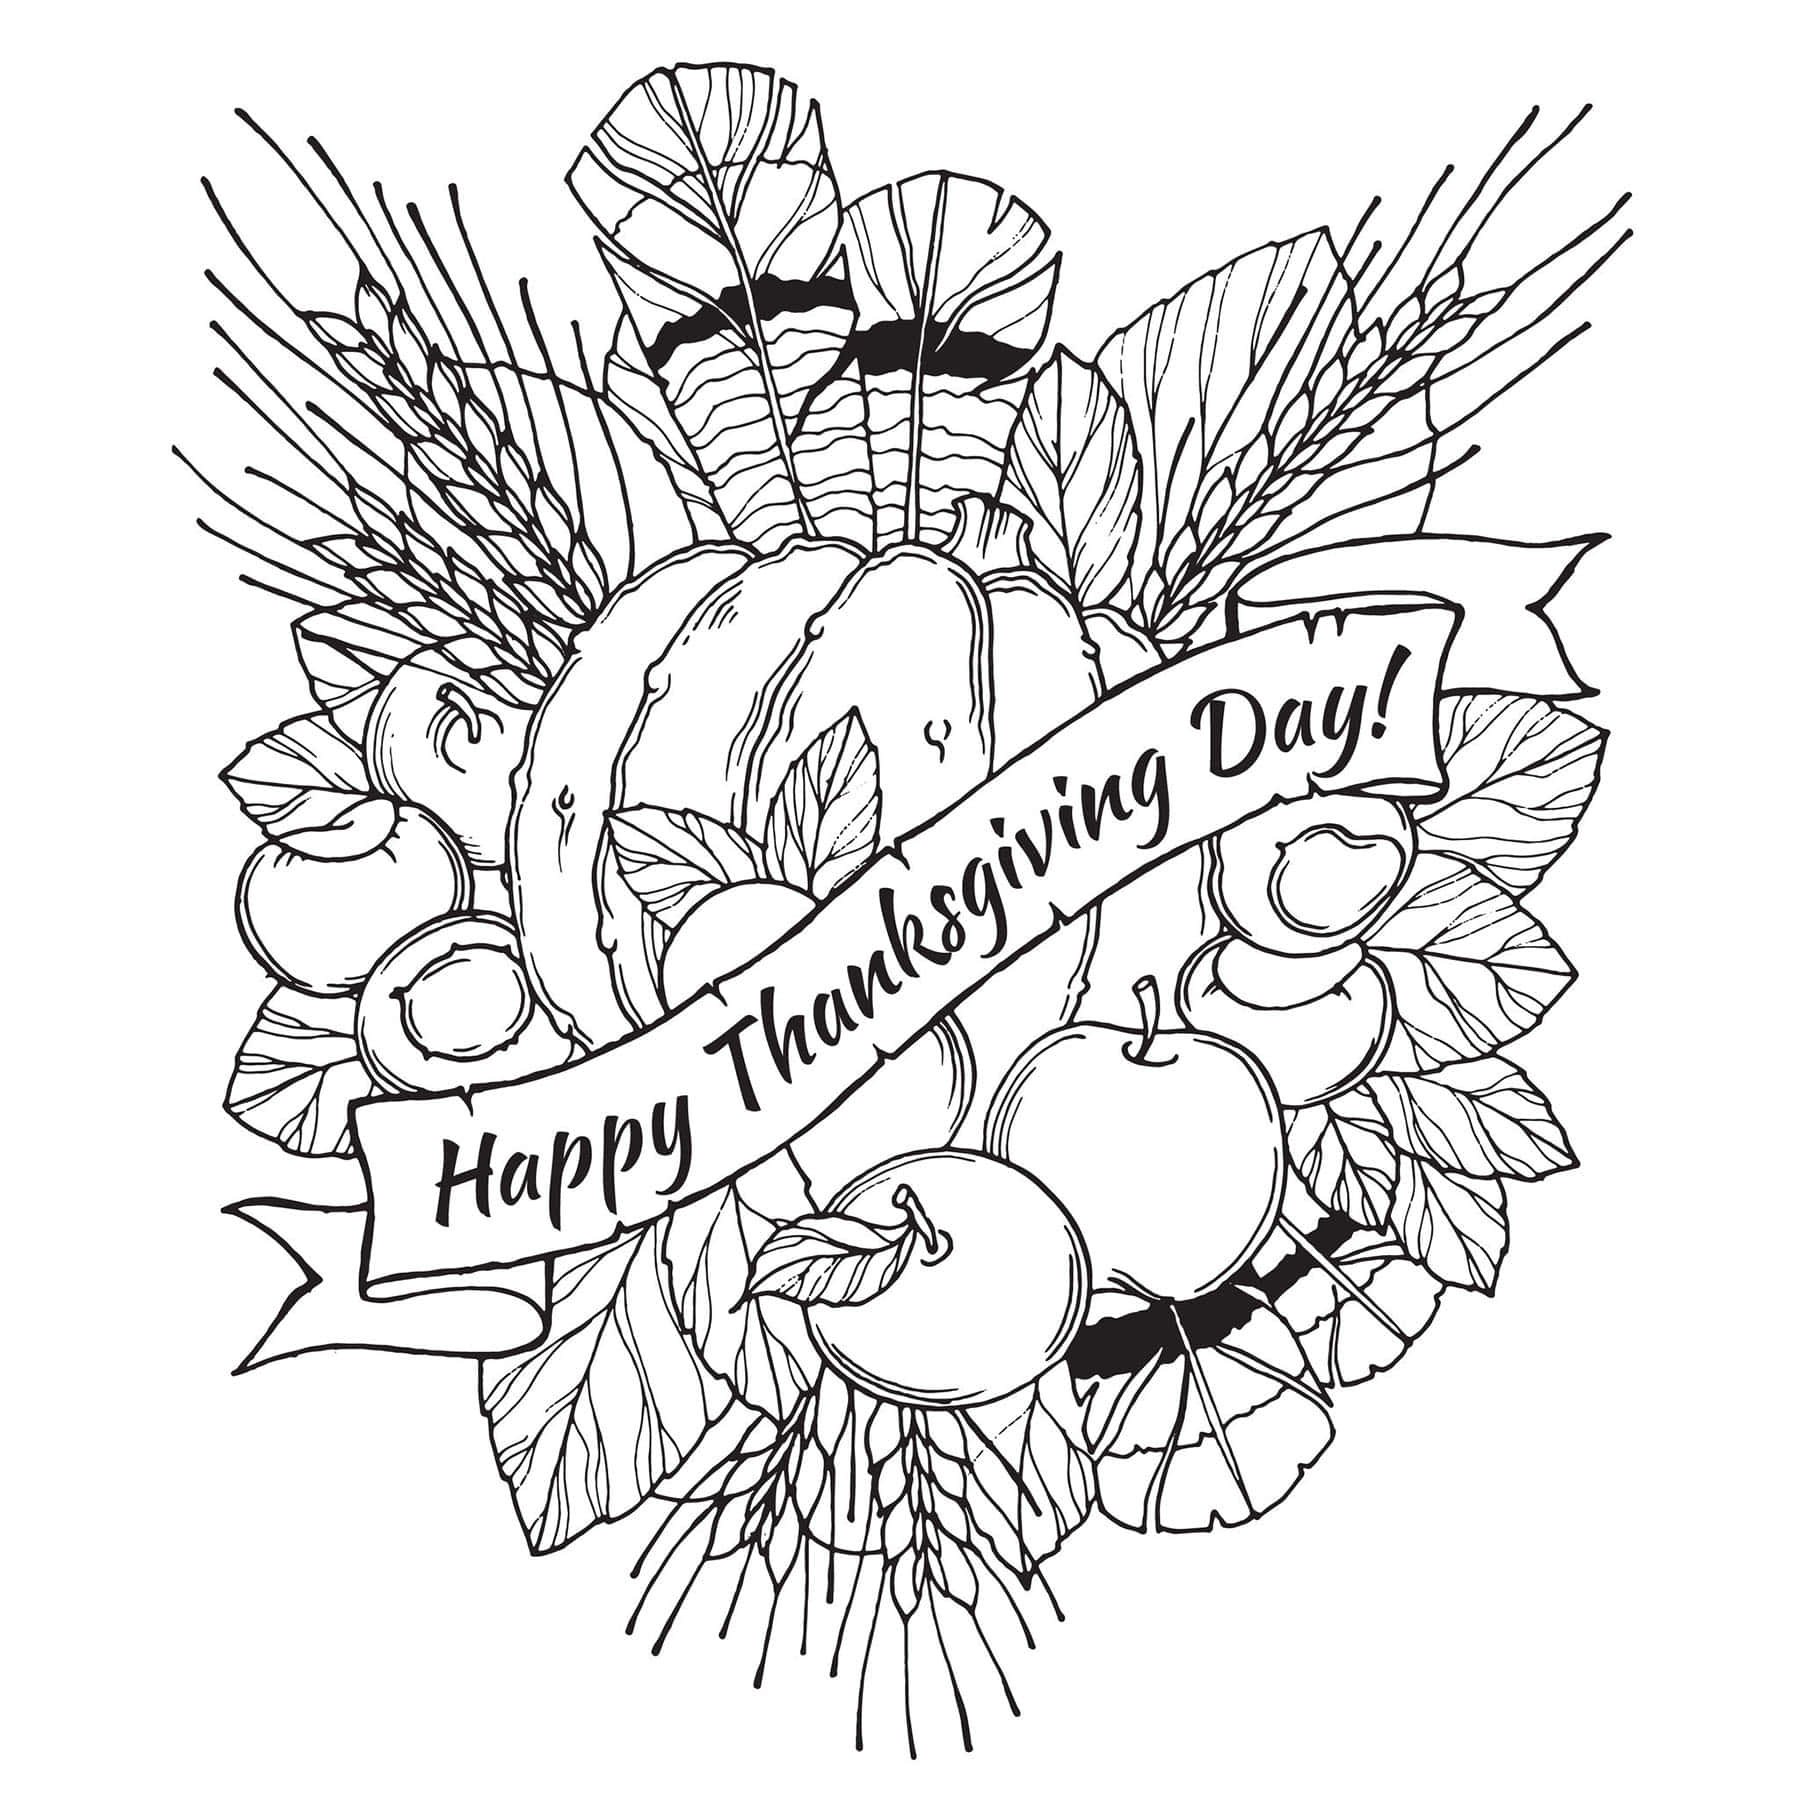 Celebrate the joy of Thanksgiving with a fun coloring activity